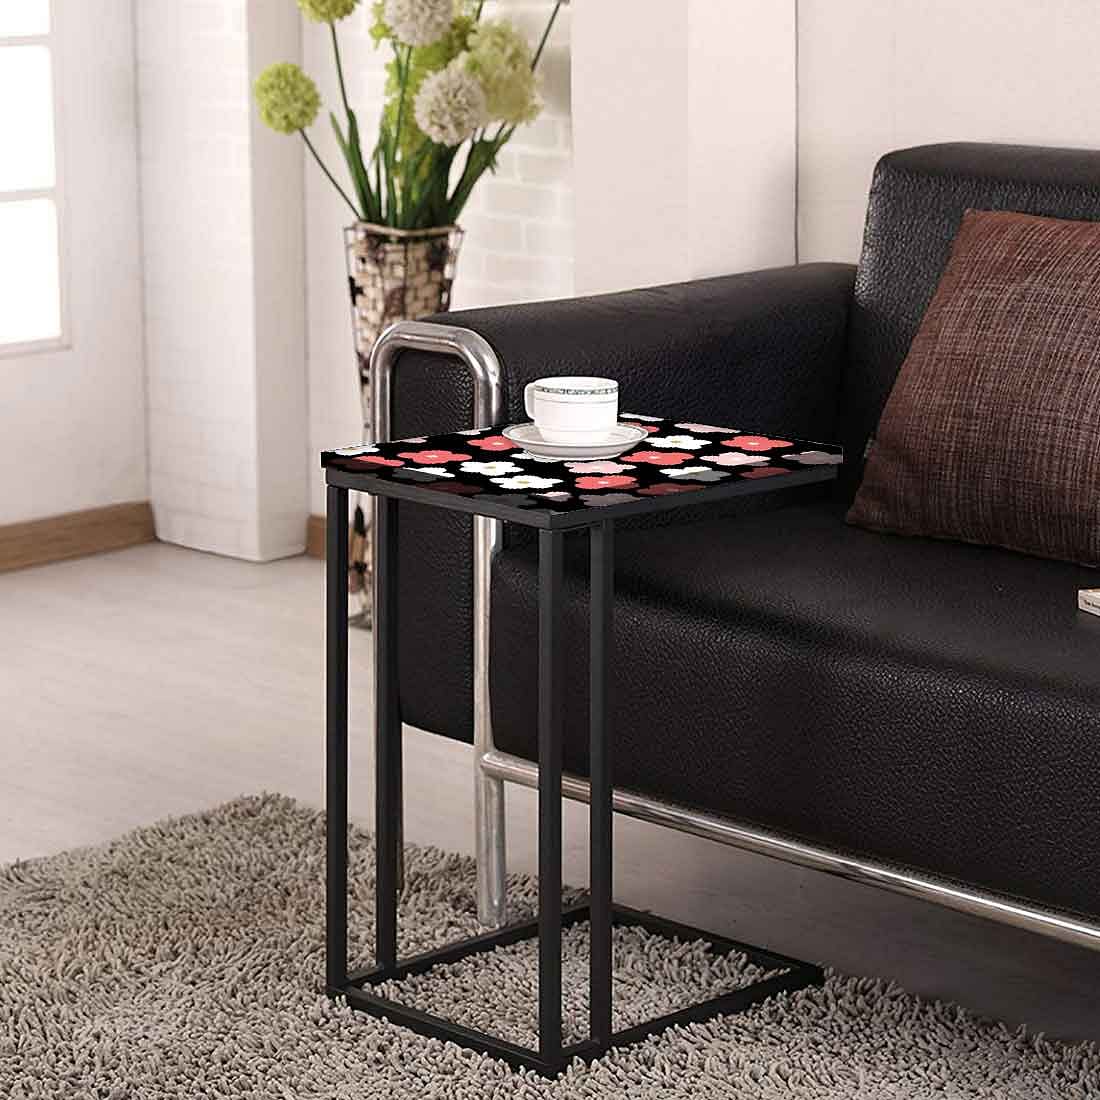 Amazing Floral C Side Table - Flowers Nutcase